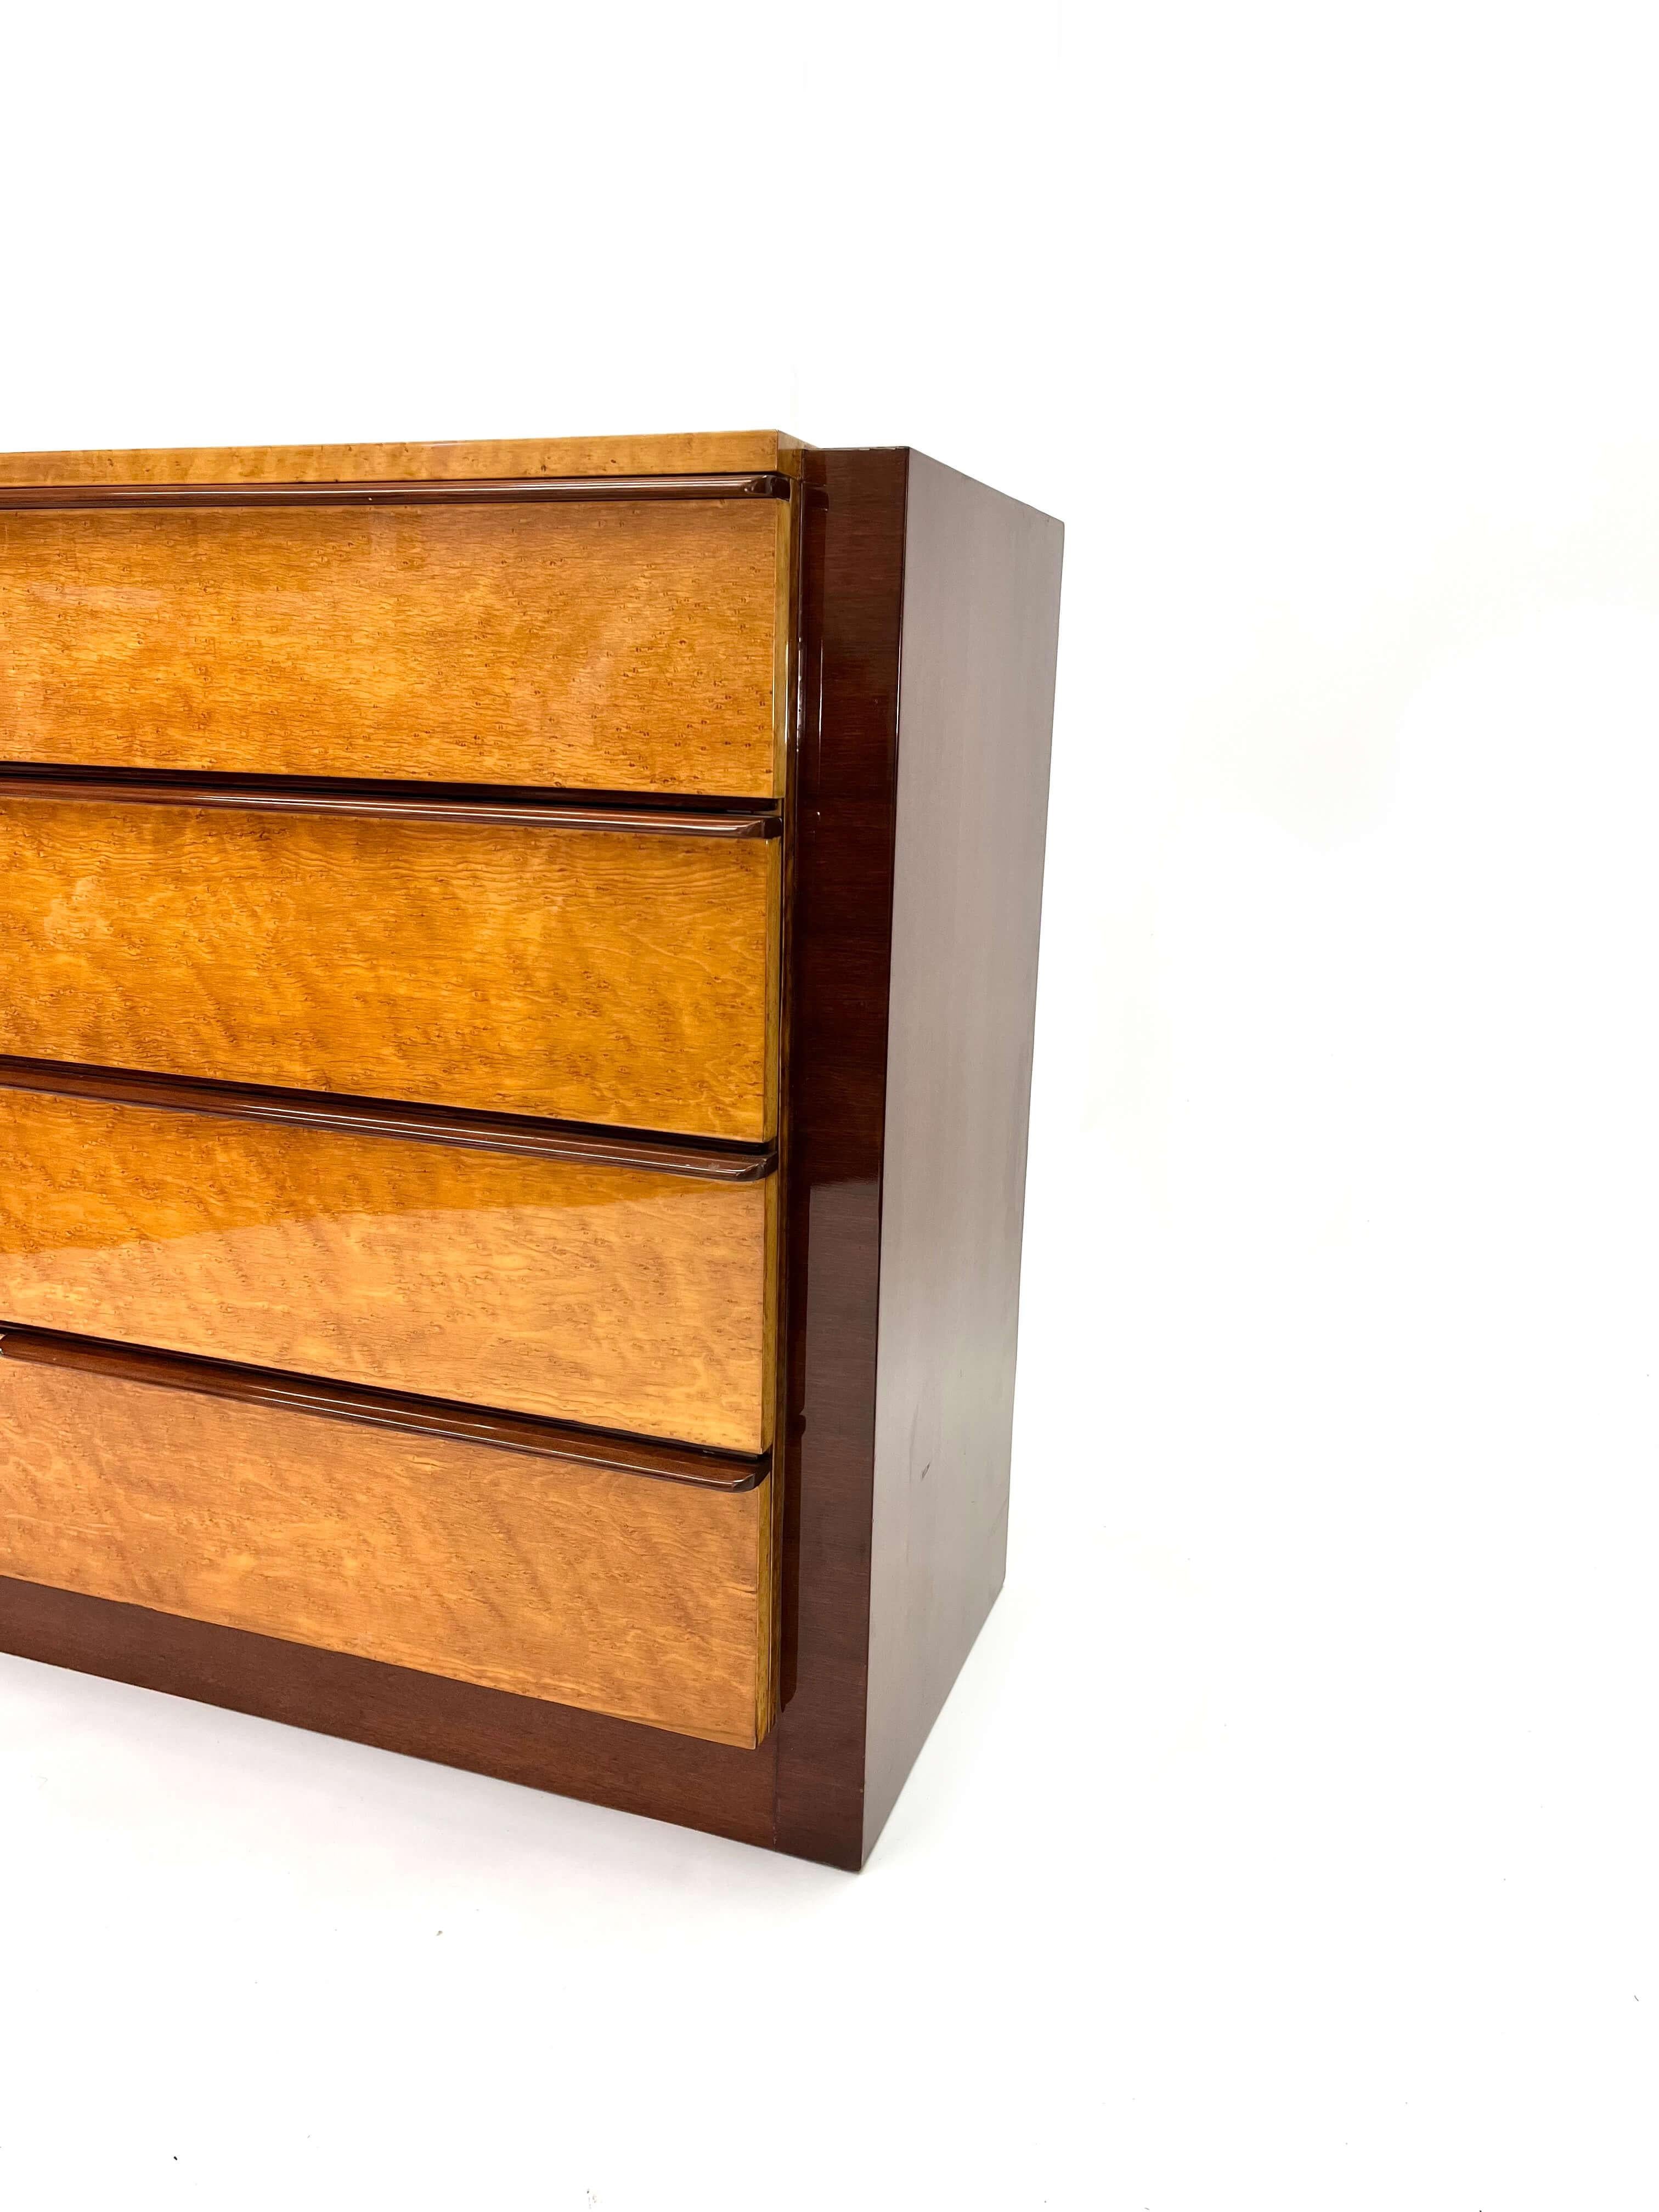 American Gilbert Rohde Chest of Drawers for Herman Miller in Birdseye Maple and Mahogany